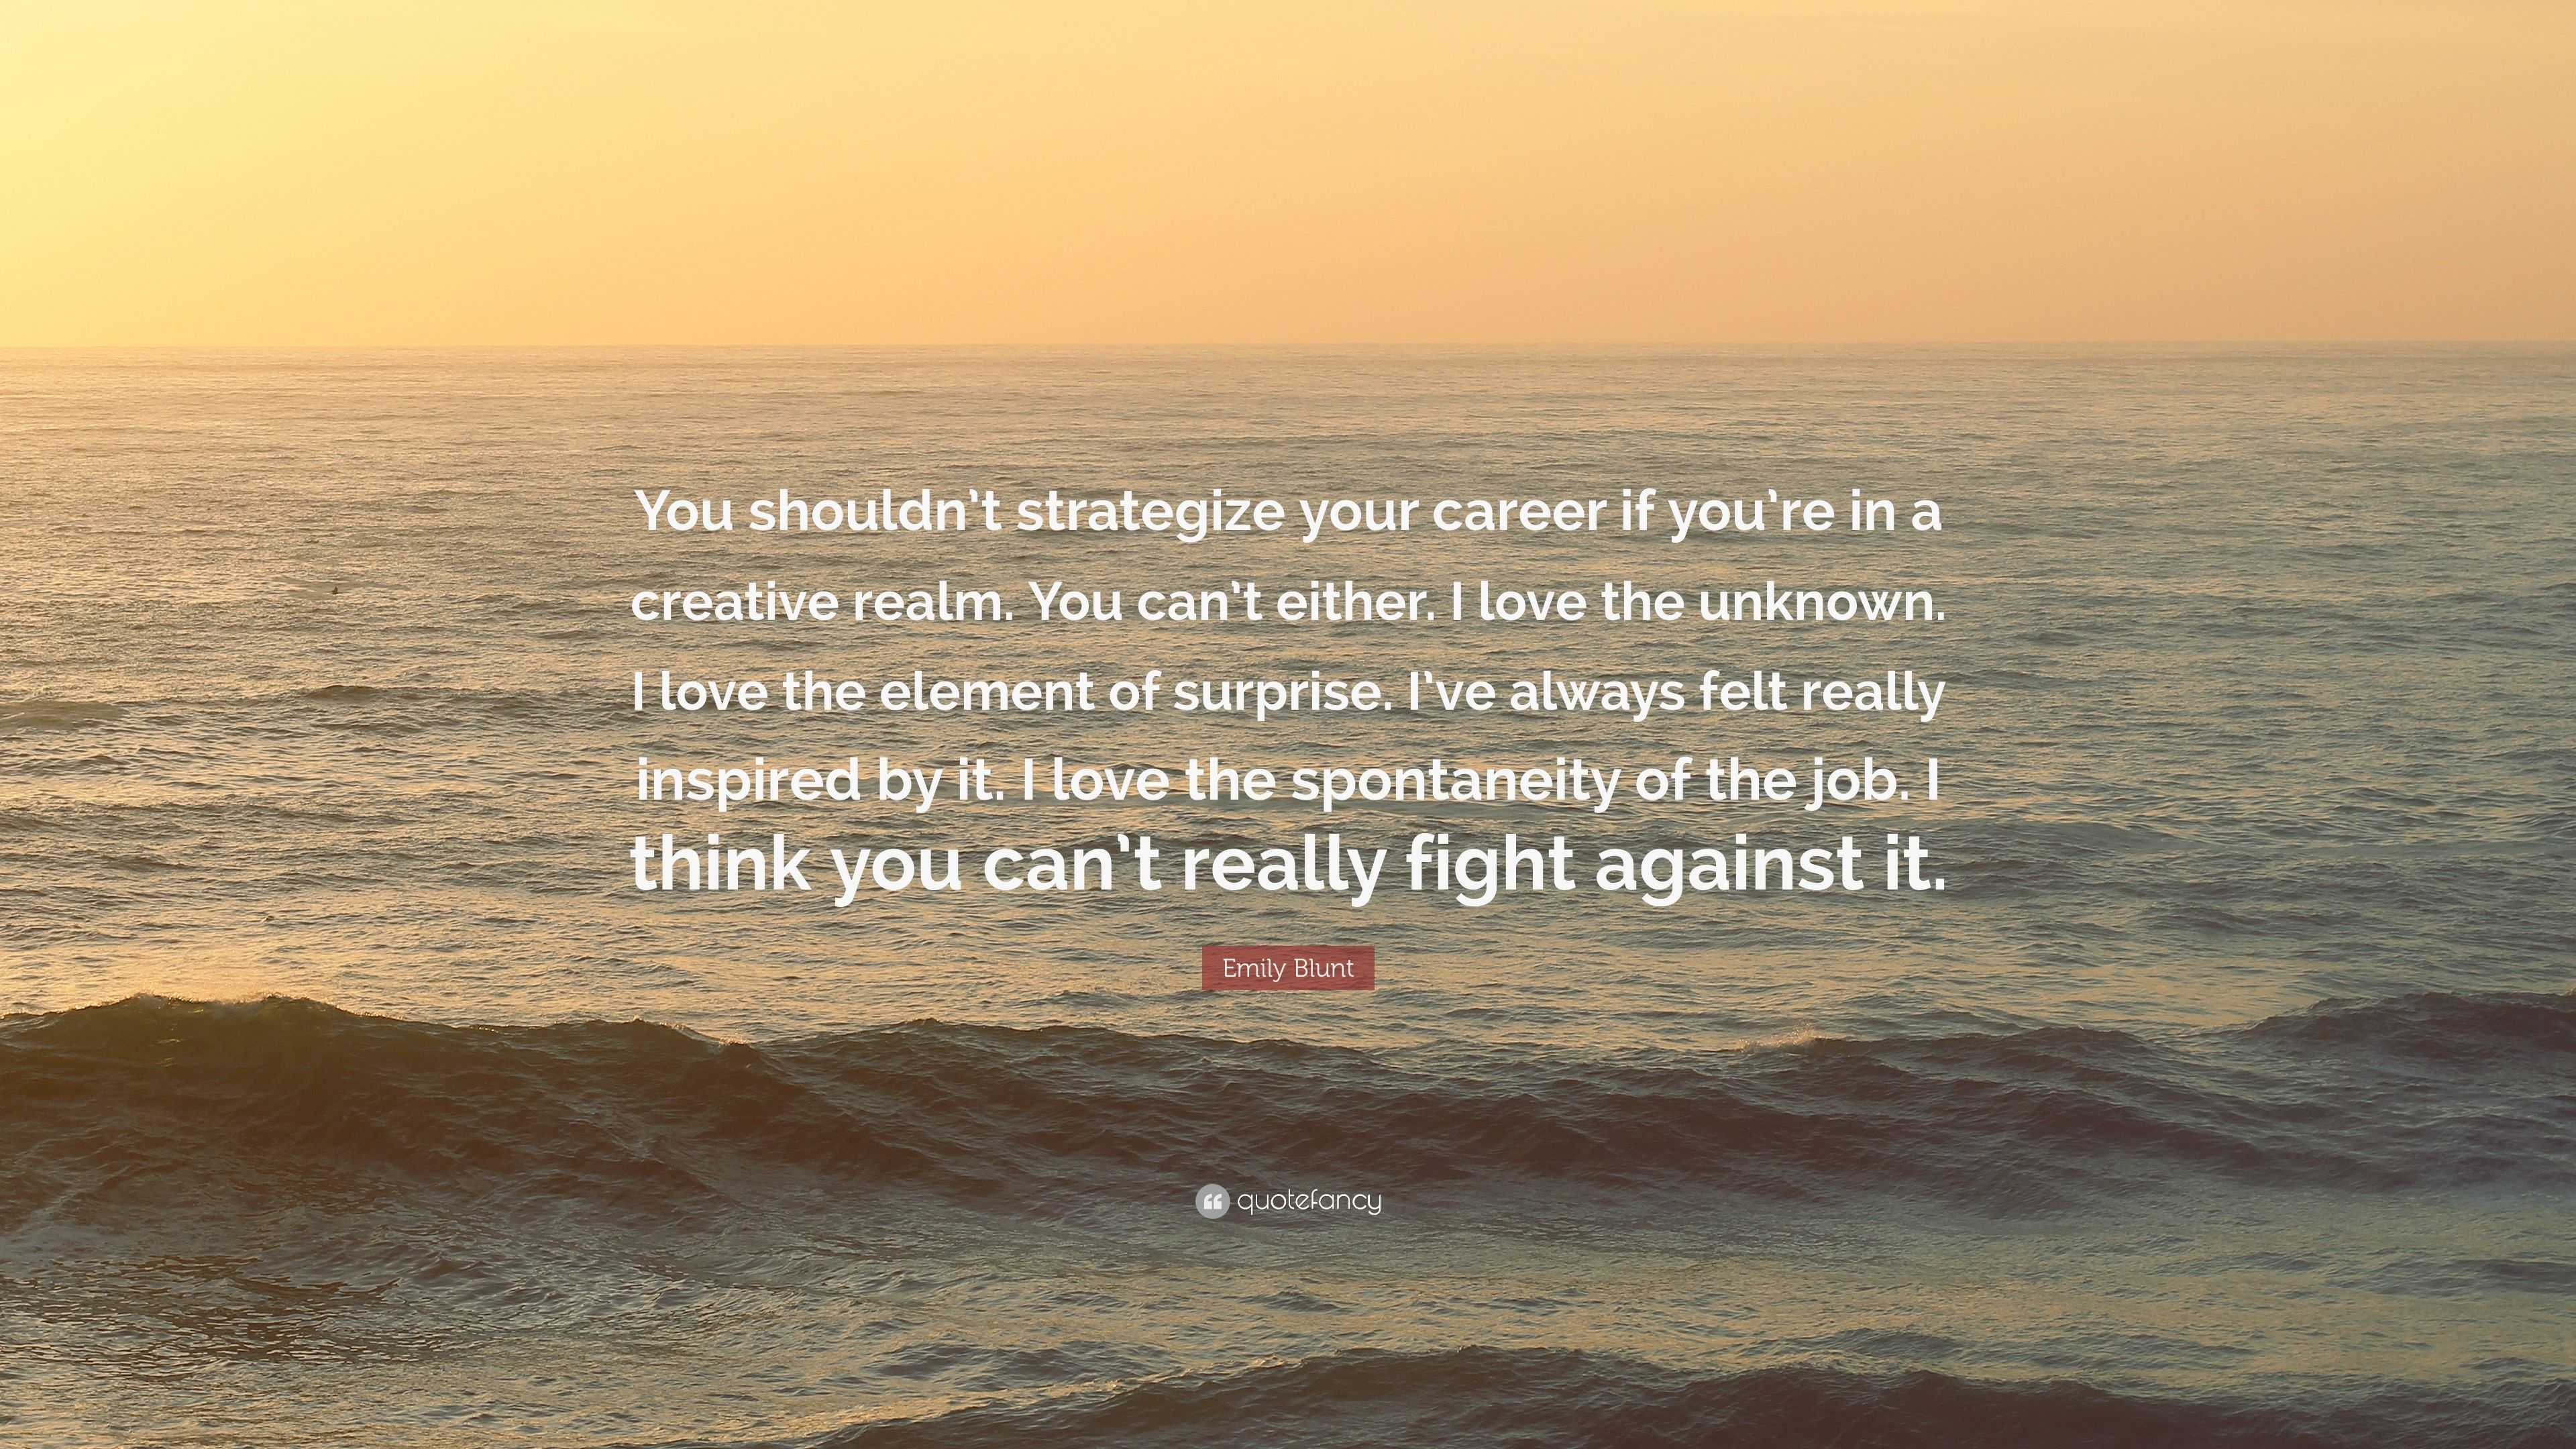 Emily Blunt Quote: “You shouldn’t strategize your career if you’re in a ...